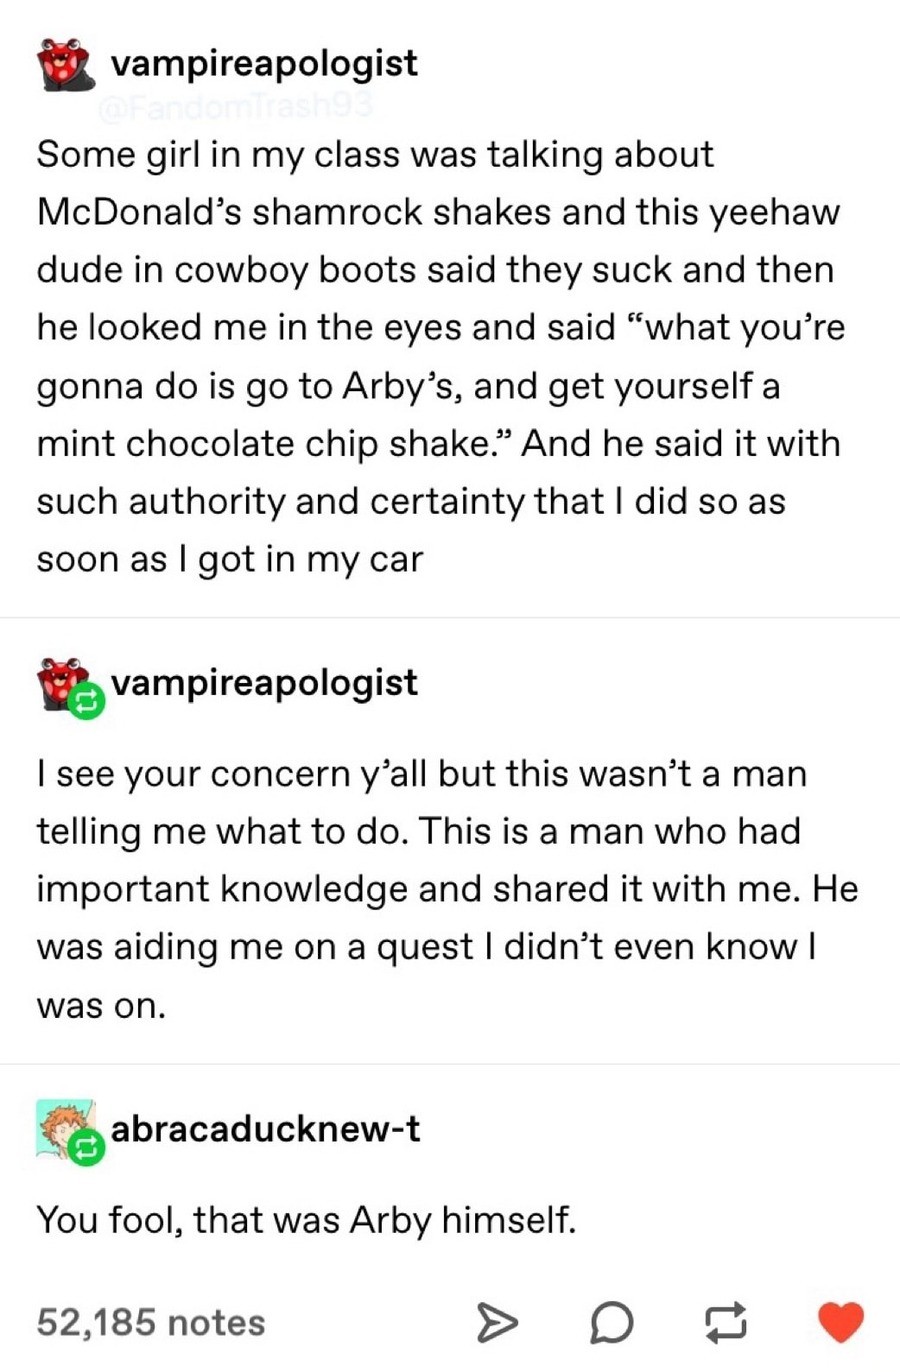 document - vampireapologist Some girl in my class was talking about McDonald's shamrock shakes and this yeehaw dude in cowboy boots said they suck and then he looked me in the eyes and said "what you're gonna do is go to Arby's, and get yourself a mint ch